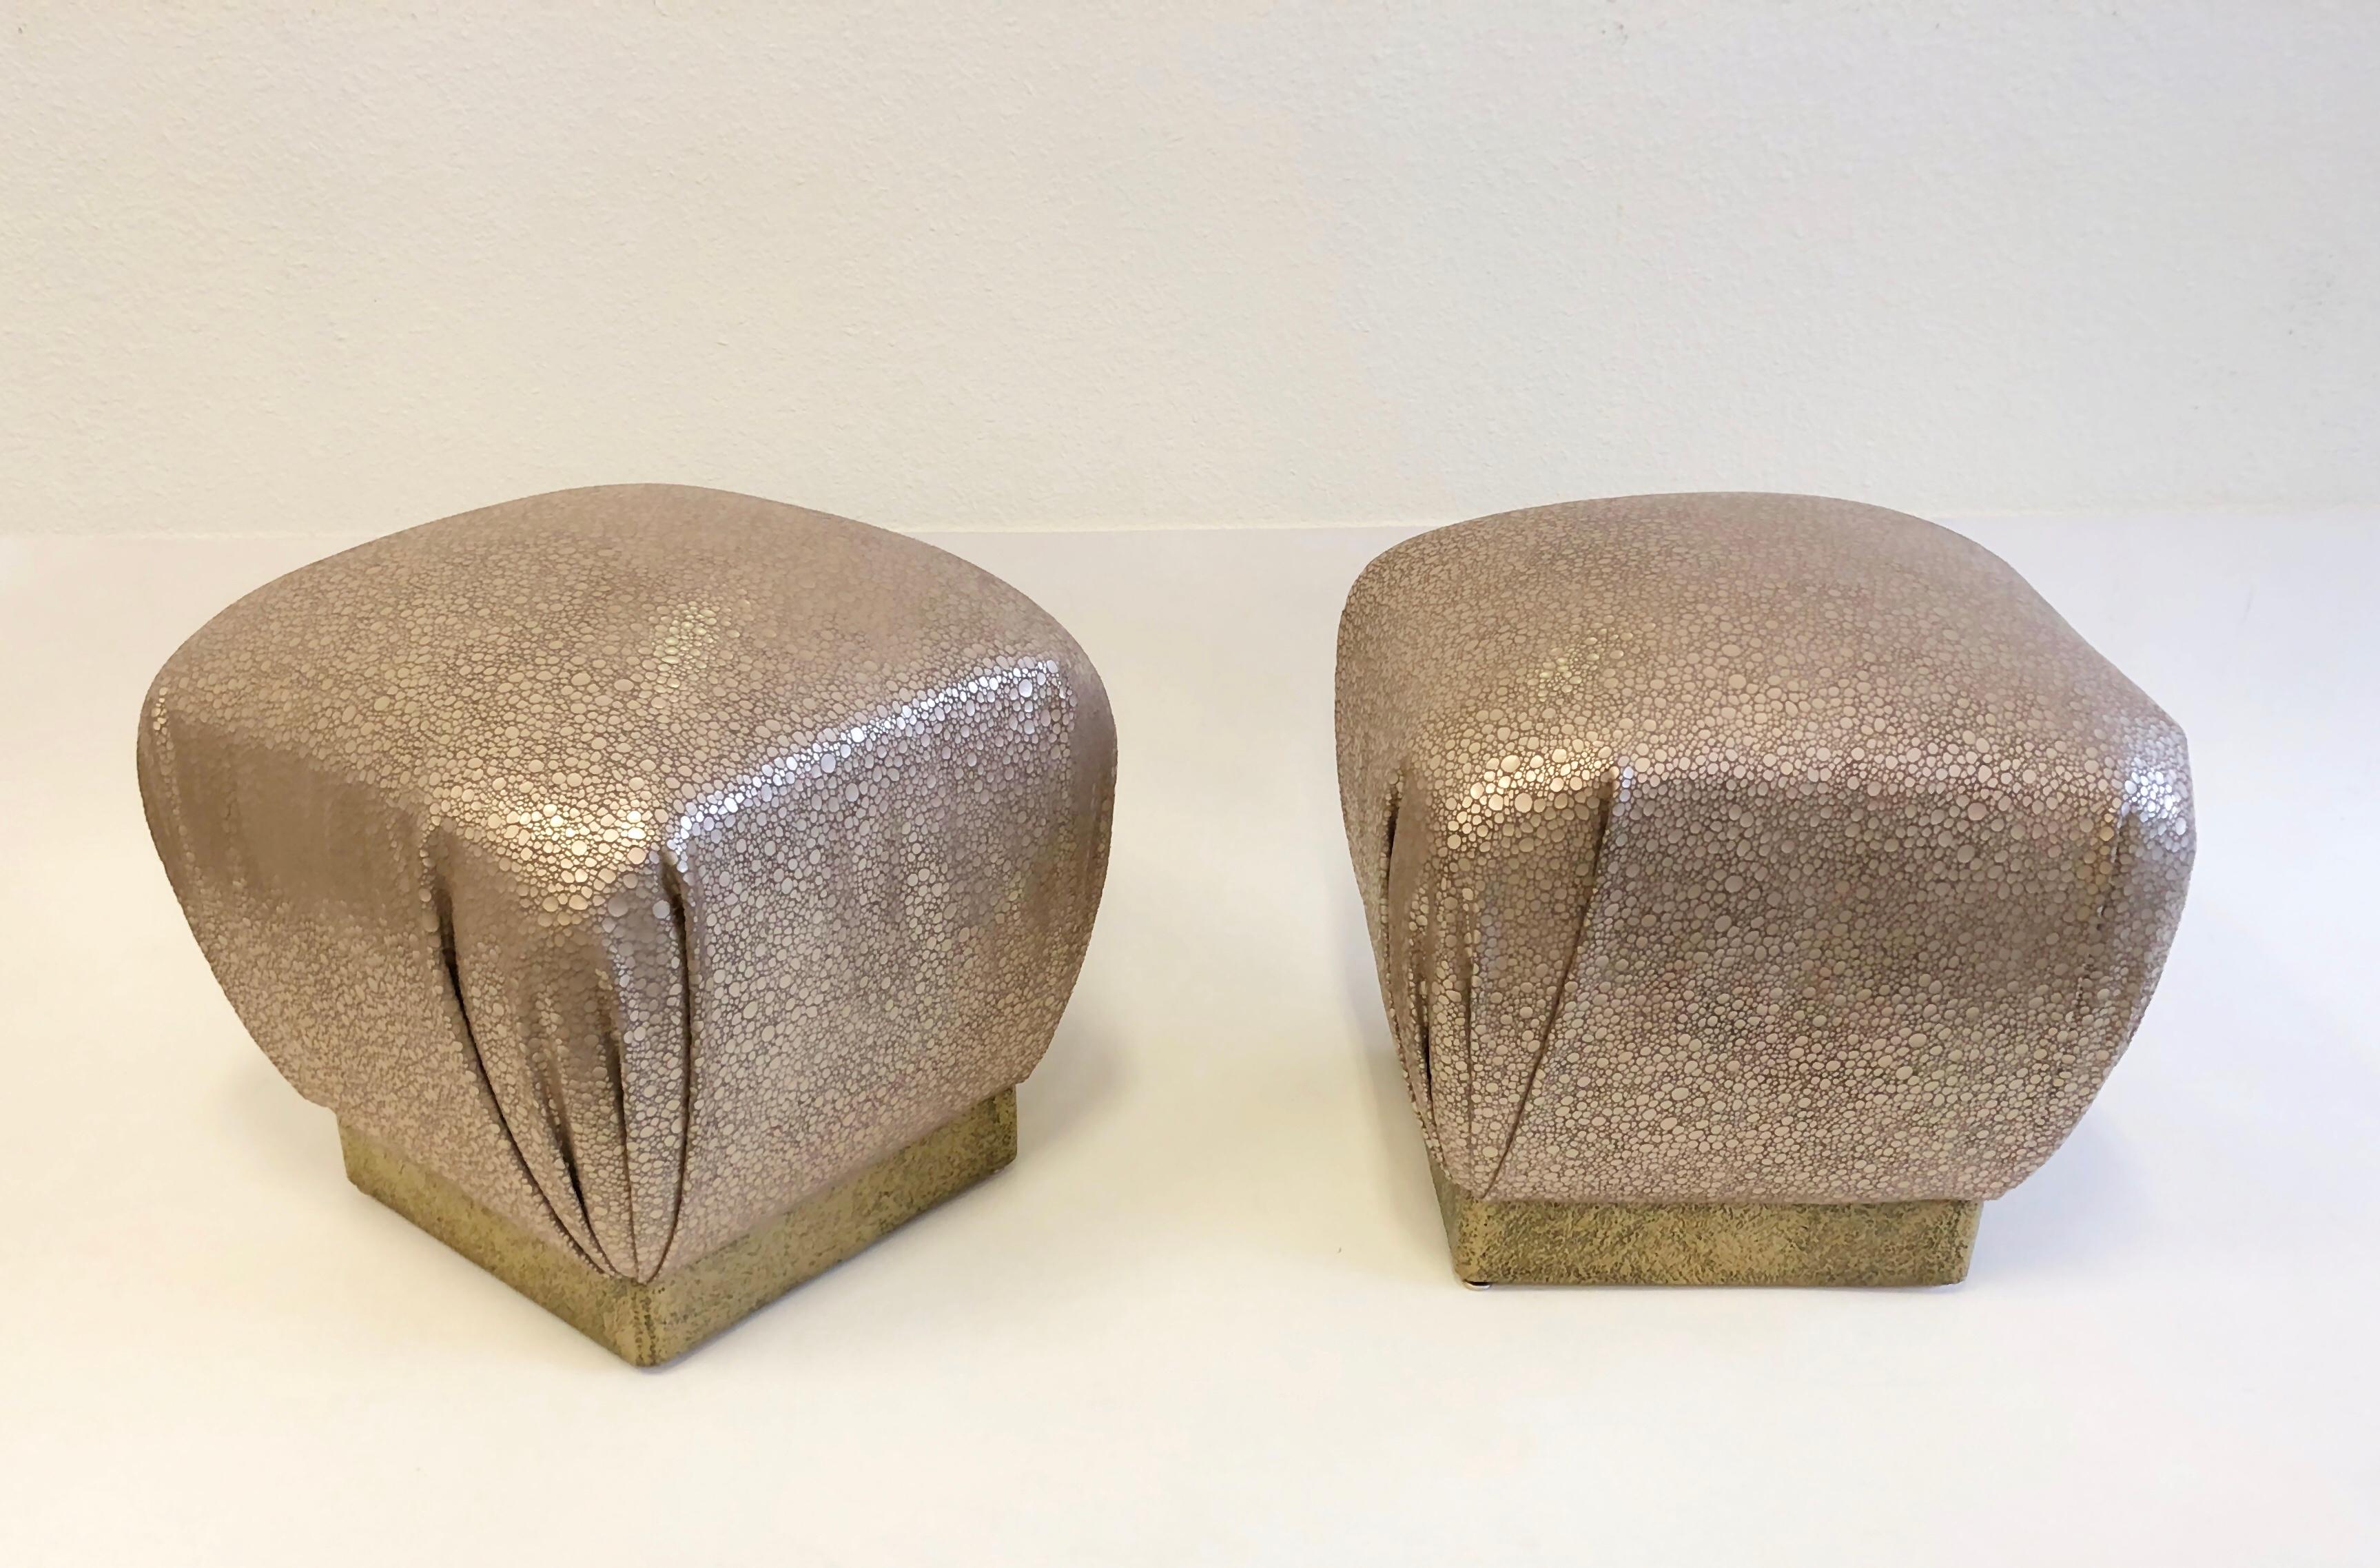 A pair of custom leather poufs with a Brutalist brass base design by Marge Carson in the 1970s. The poufs have been newly recovered with a soft lite rose champagne color leather (see detail photos).
Dimensions: 18.5” high, 19” wide, 19” deep.